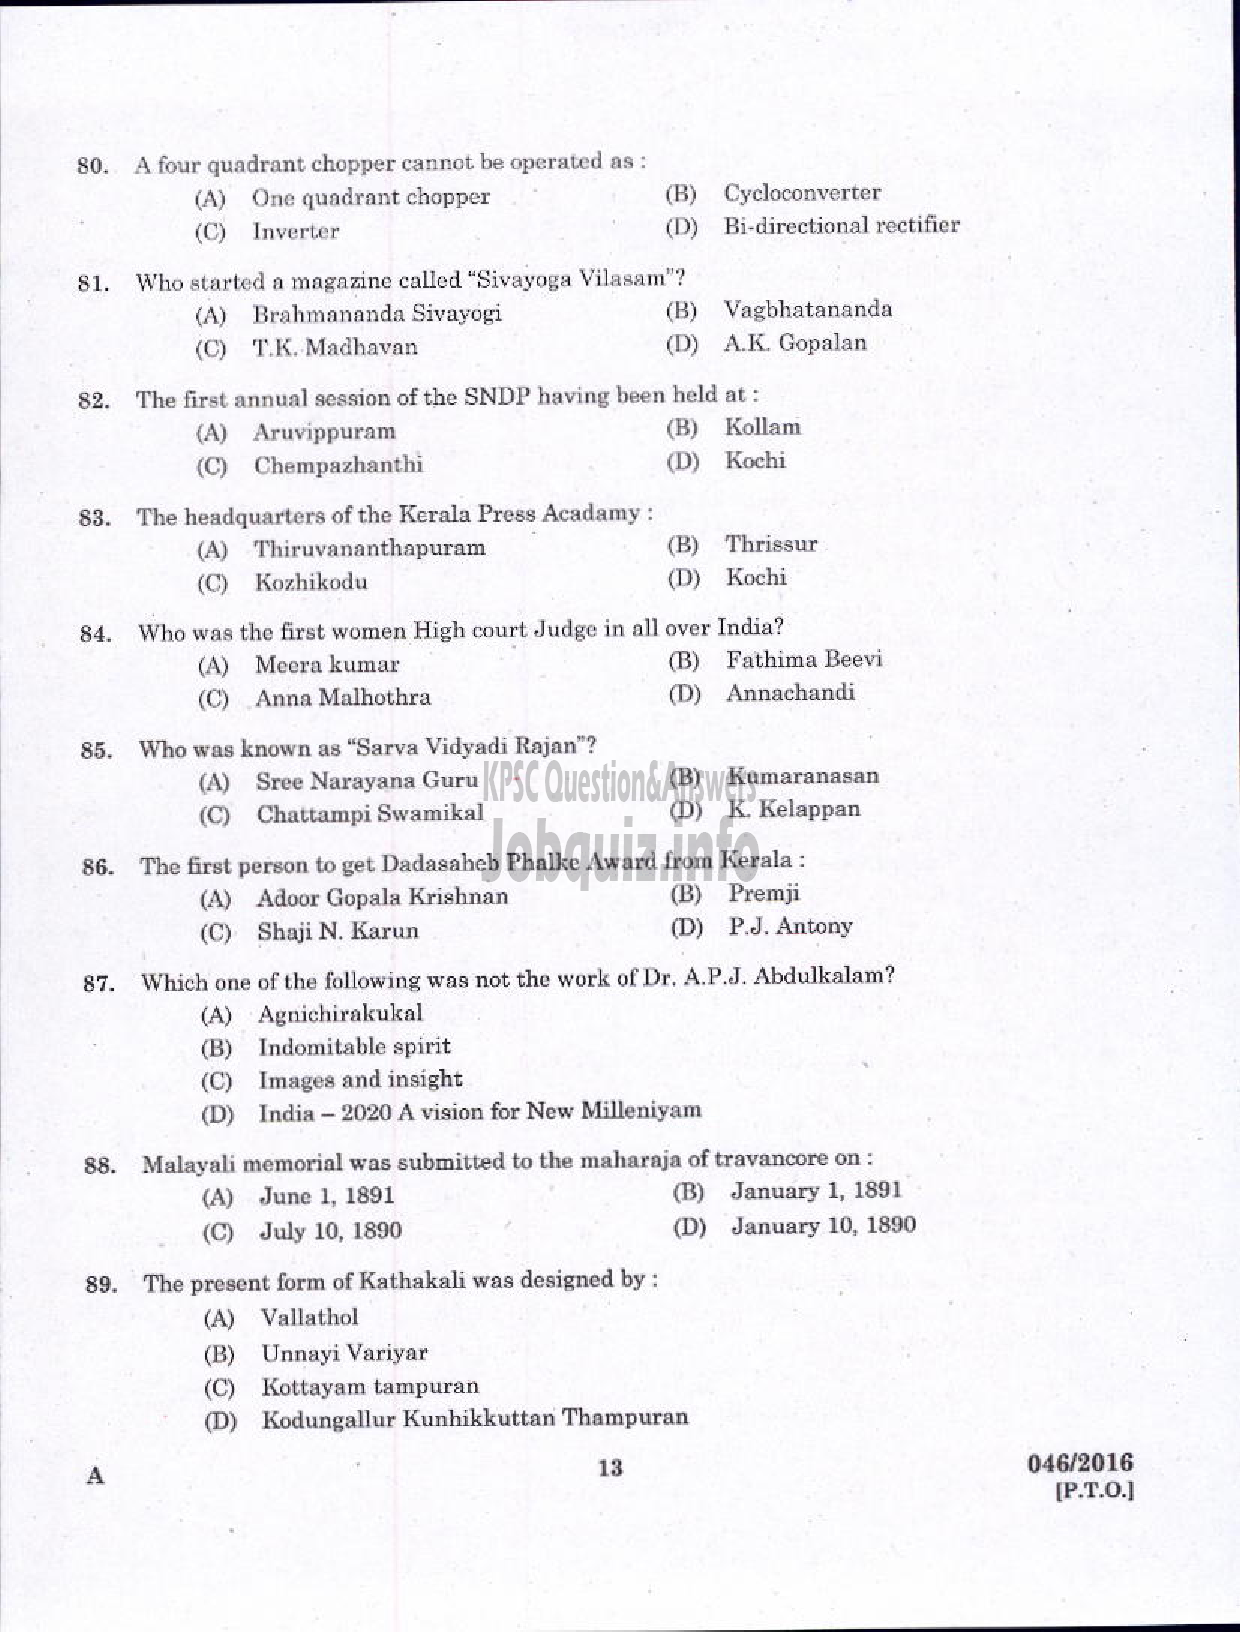 Kerala PSC Question Paper - VOCATIONAL TEACHER MAINTENANCE AND REPAIRS OF RADIO AND TELEVISION-11